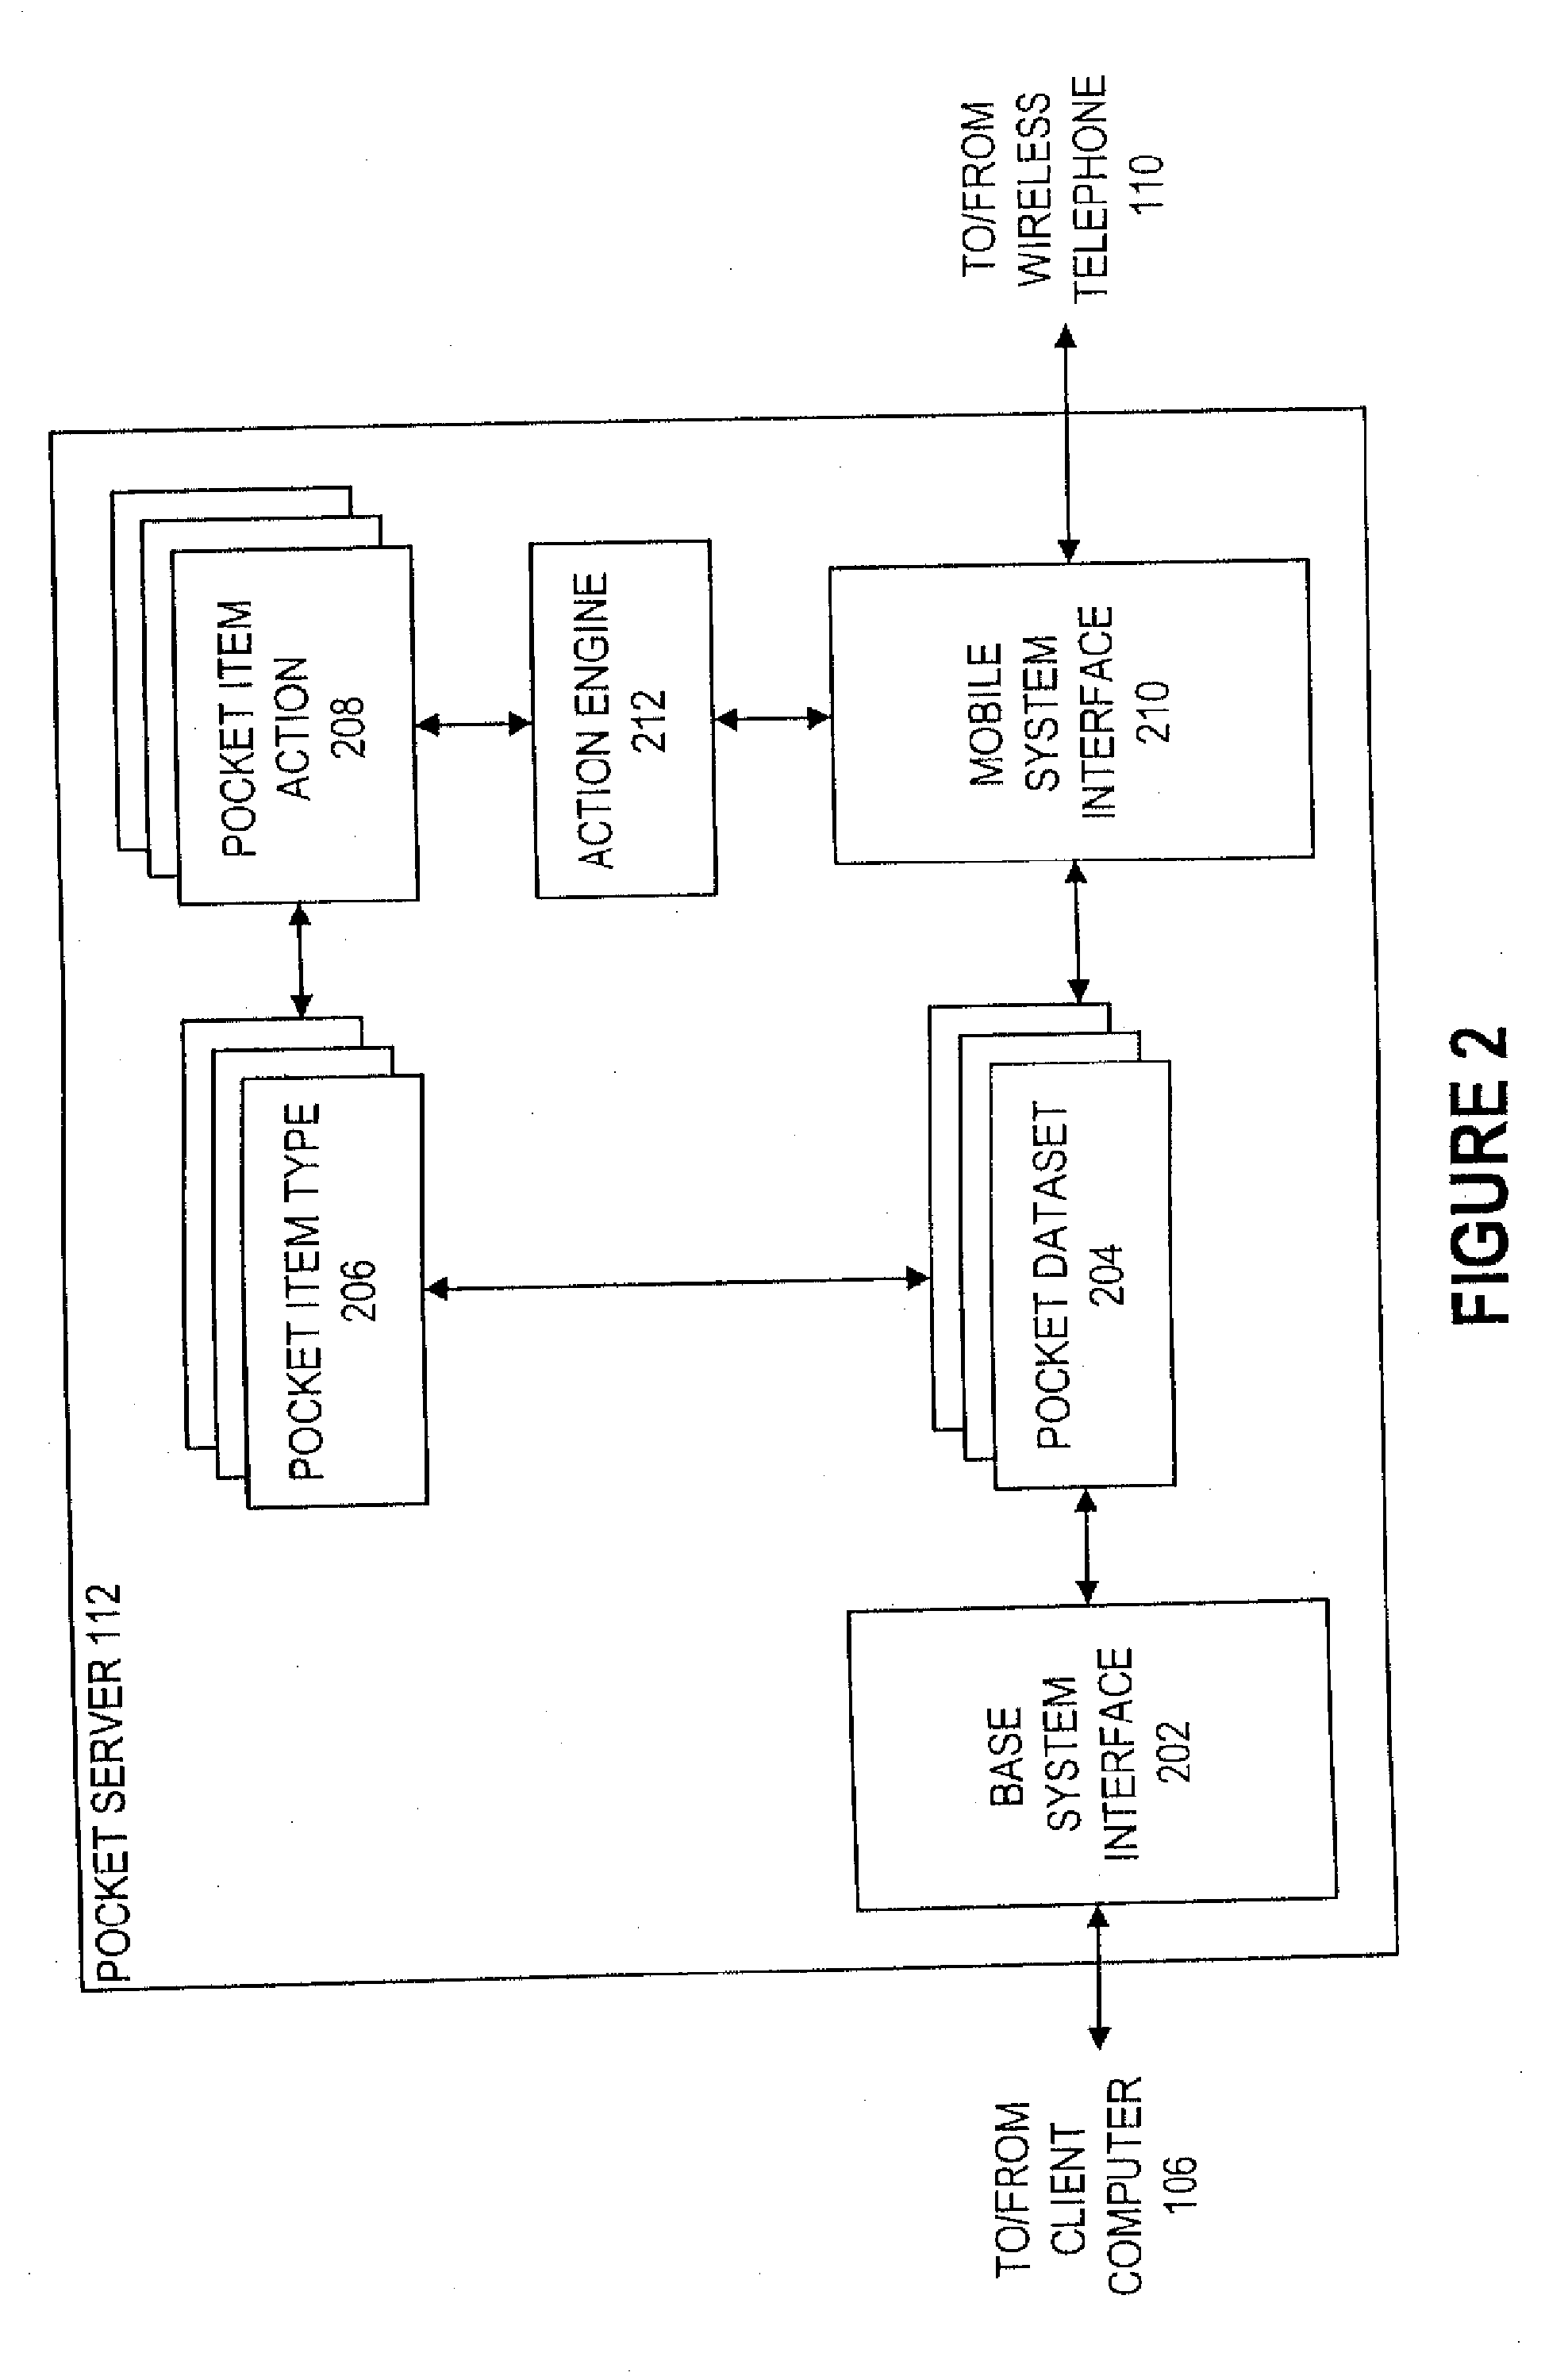 Data Synchronization Mechanism for Information Browsing Systems